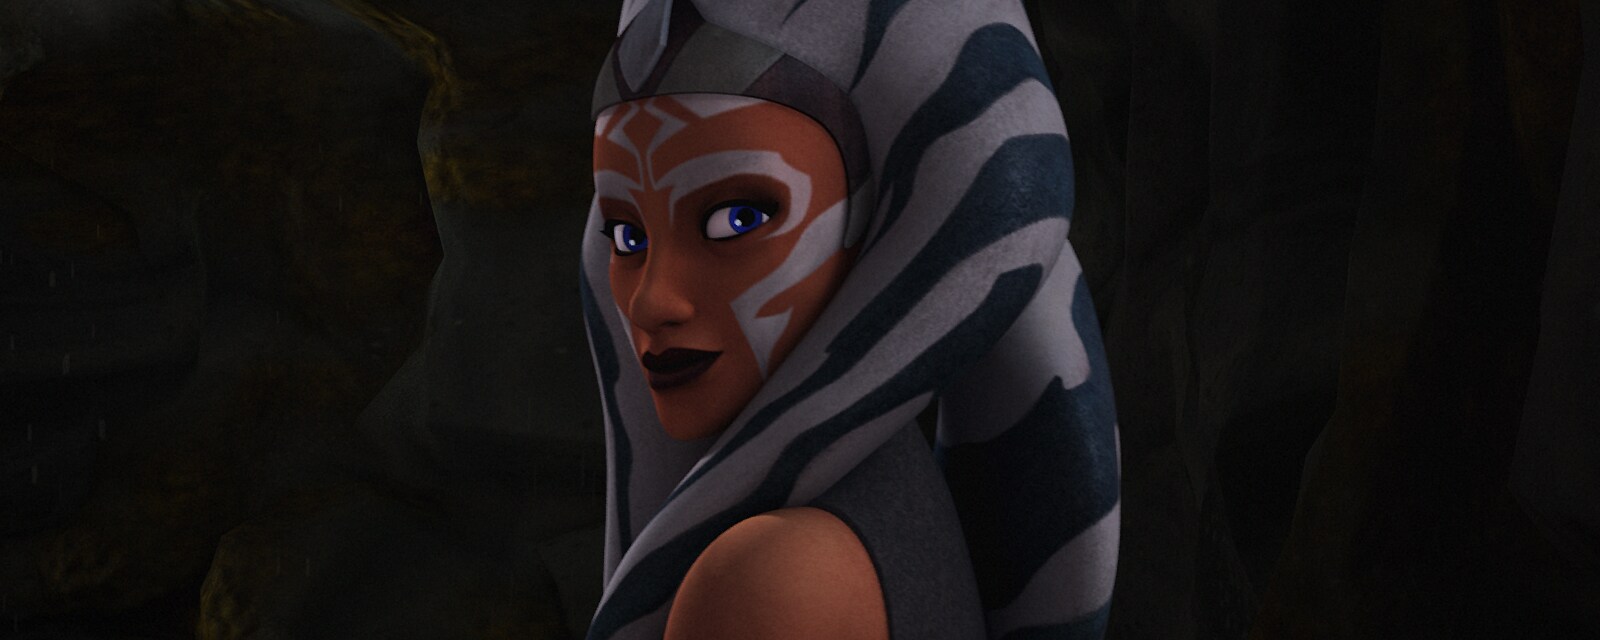 Ahsoka Tano from Star Wars Rebels, looking over her shoulder.